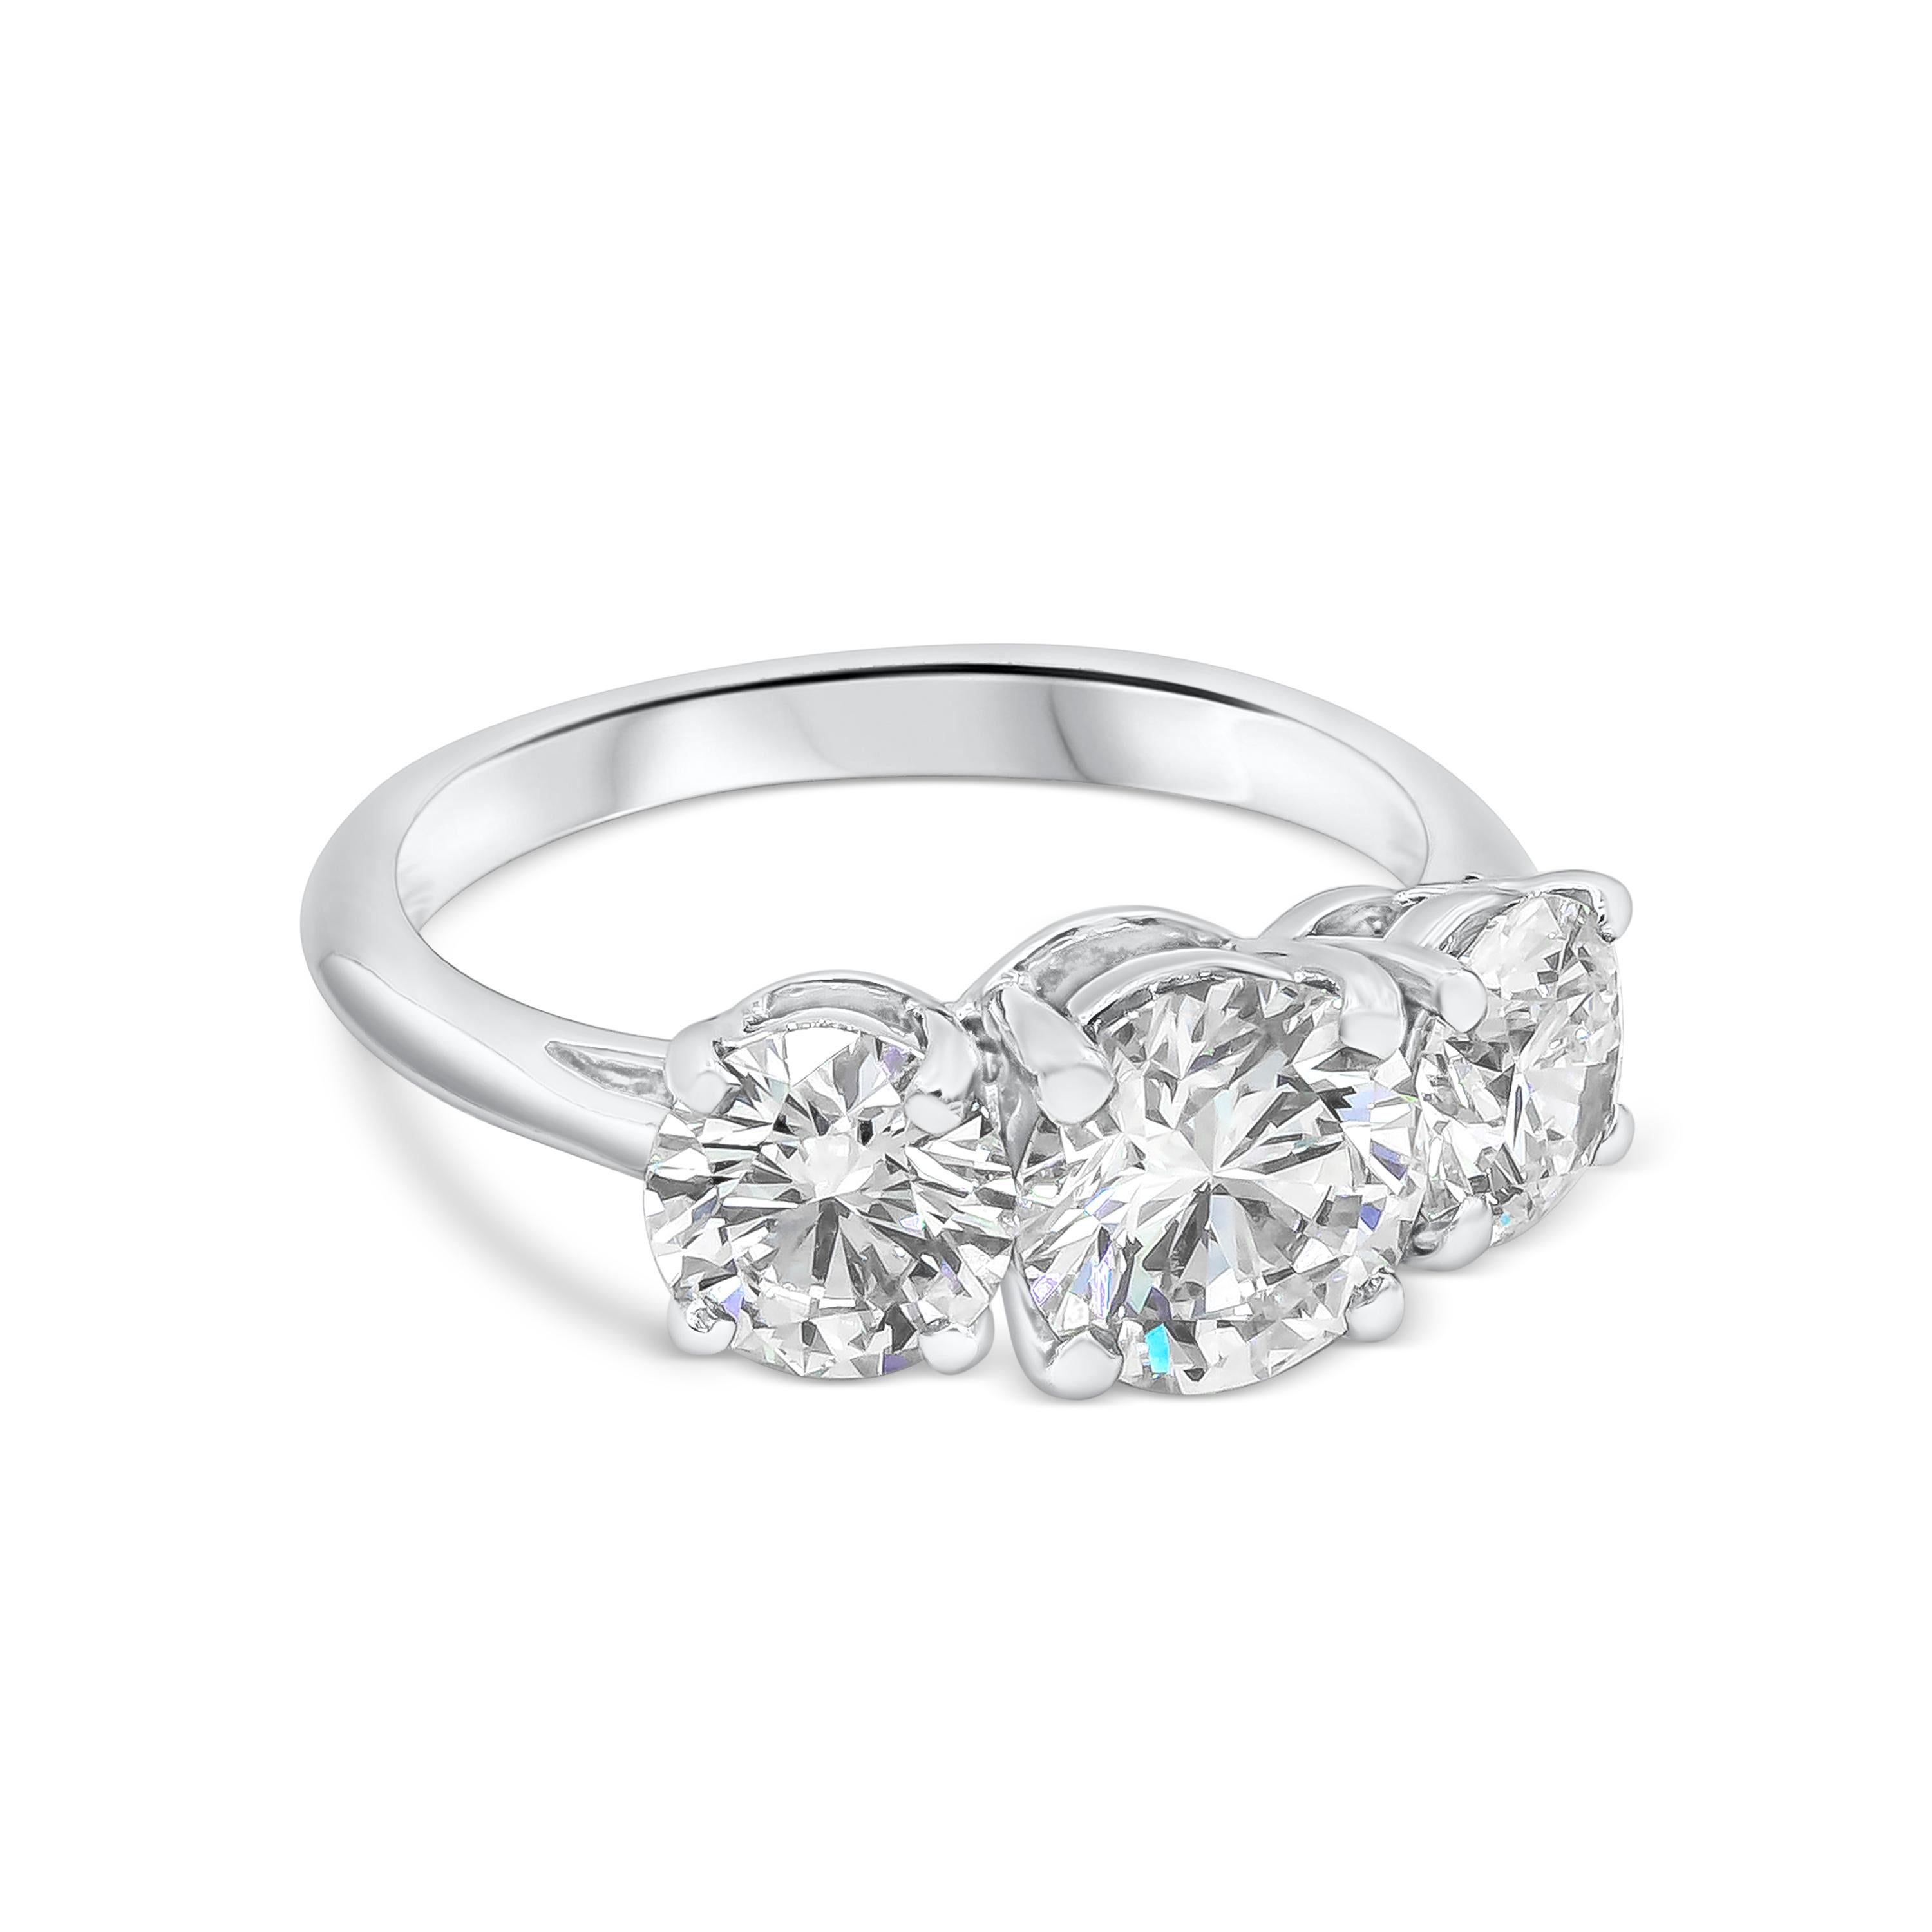 Classic three-stone engagement ring by Tiffany & Co. The center diamond is 1.22ct H, VS1. Flanked on either side by round diamonds 0.71ct H, VS1 and 0.71ct J, VVS2. All three diamonds are certified by GIA. The ring set in Platinum 950. Signed and